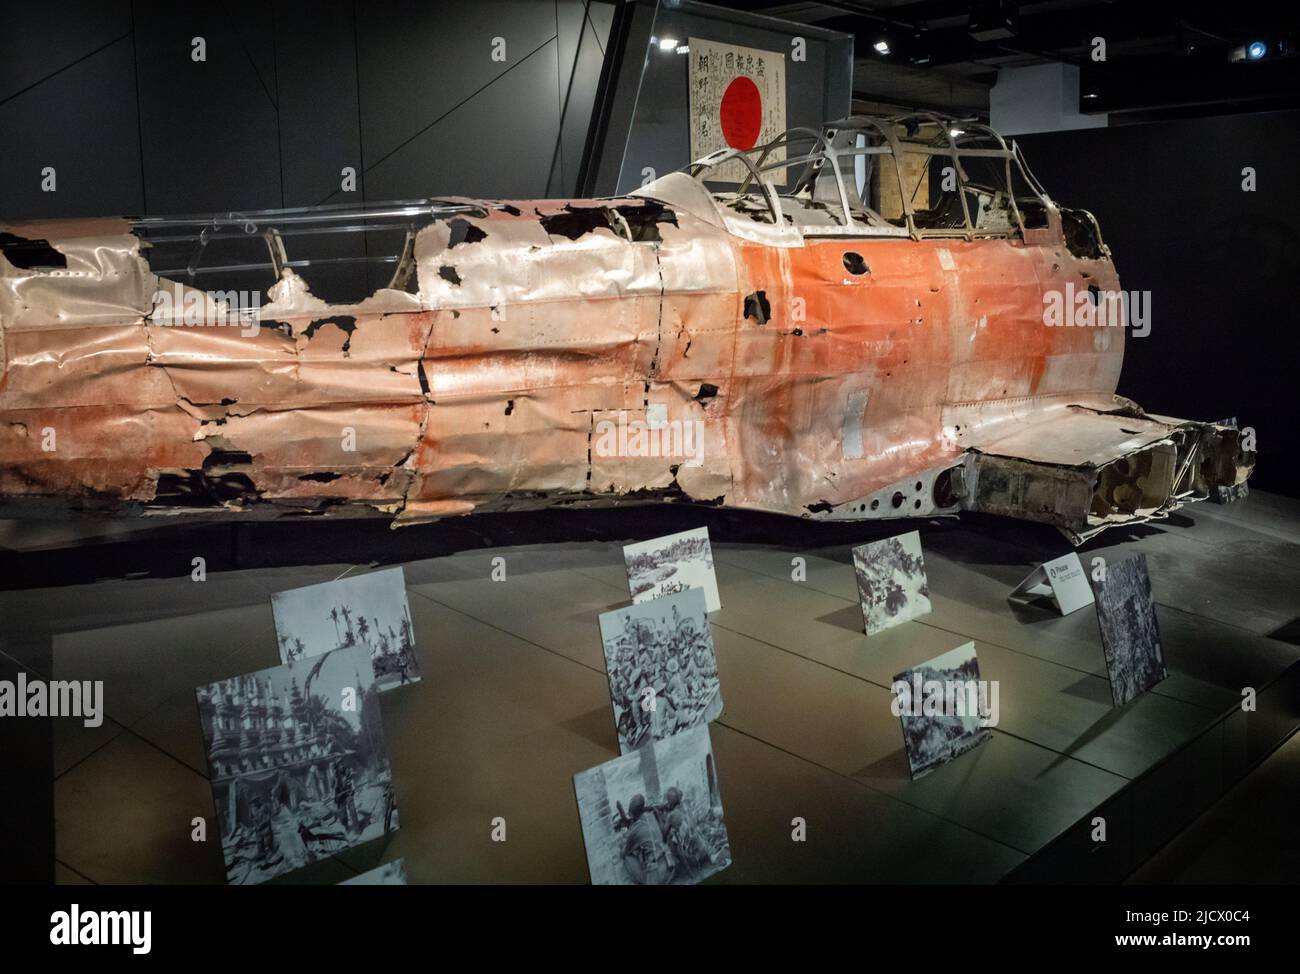 The wreckage of a WW2 Mitsubishi Zero A6M war plane on display at the Imperial War Museum (IWM) in London. The wreckage was found in the Marshall Isla Stock Photo